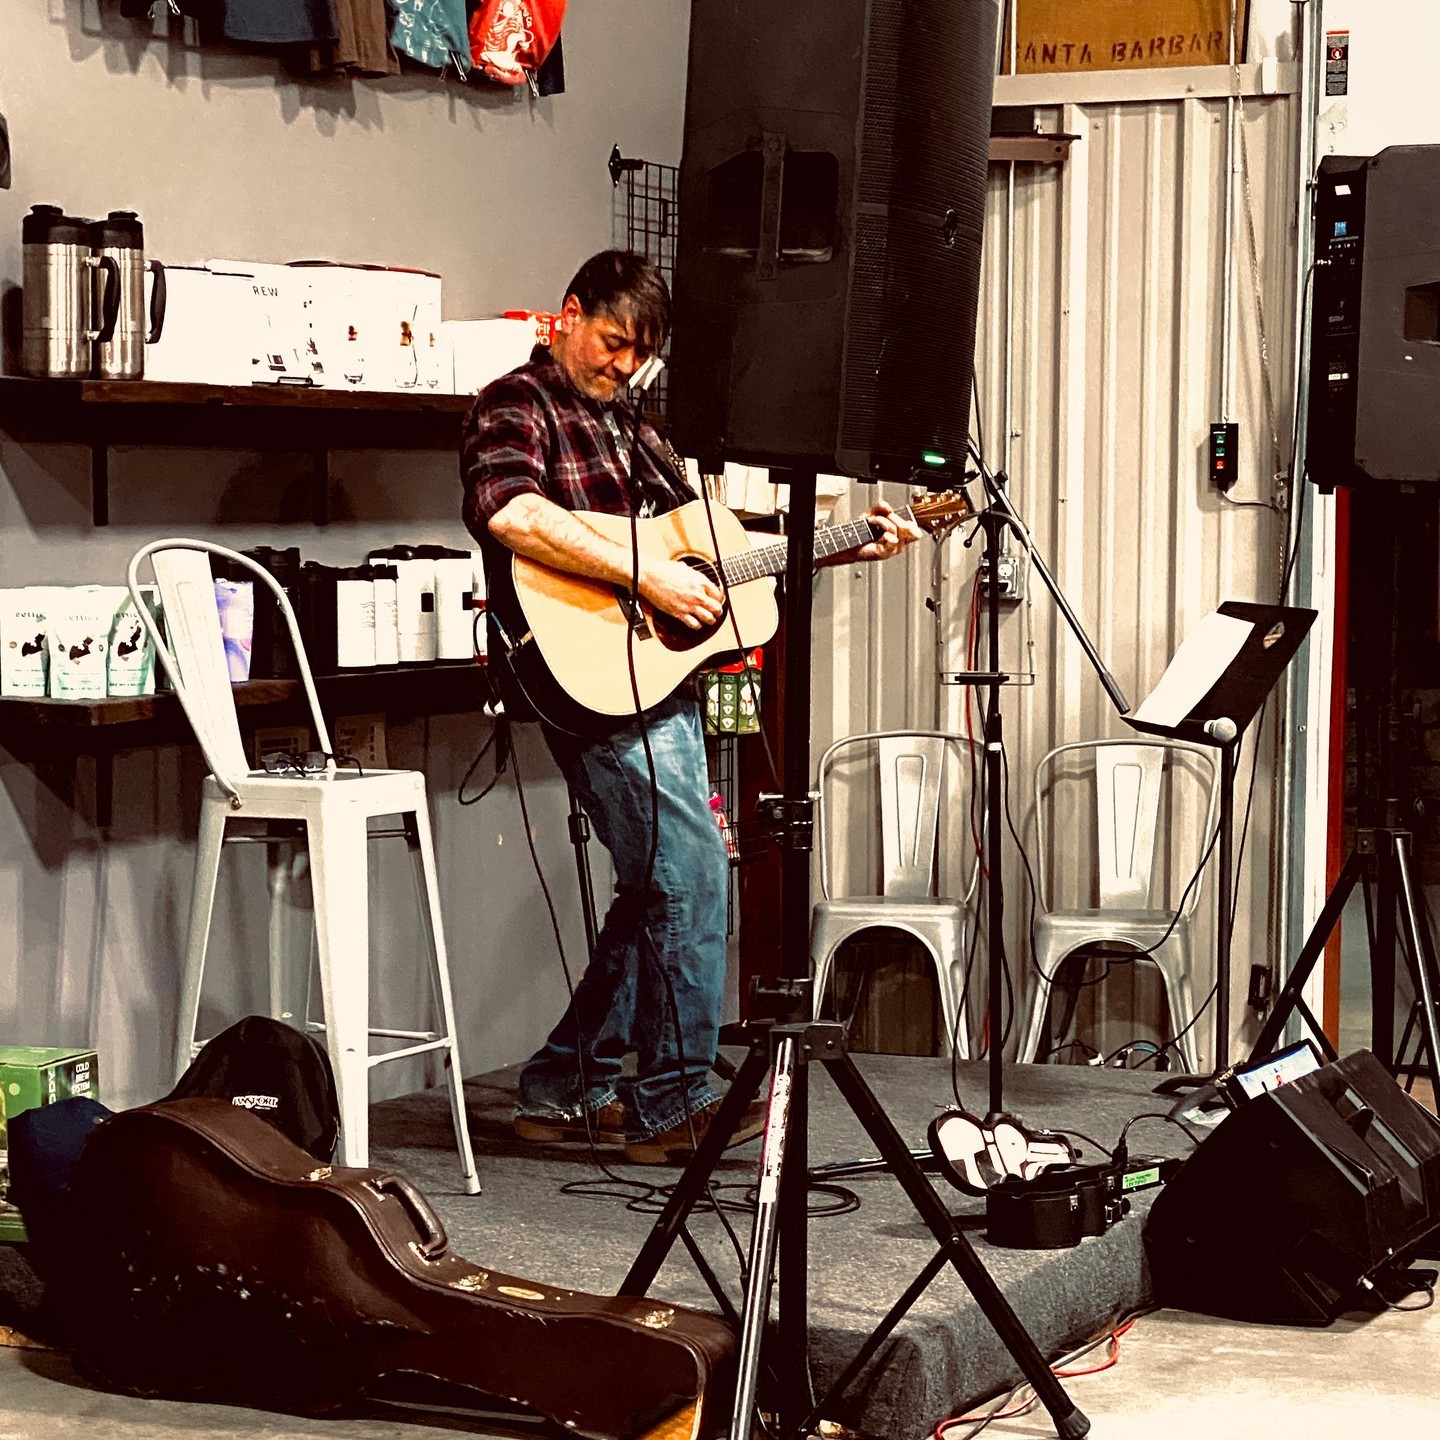 It's almost the weekend! We're still reliving last weekend's performances by Marc Higgins (pictured) on Friday and Houston Garrett on Saturday. Great shows, great people!

We've got some more talented artists coming to you this weekend. Who's ready?!

Tag us in your pictures :)

#SpartanburgEvents #DiscoverSpartanburg #SpartanburgSC #SpartanburgCommunity #SpartanburgFun